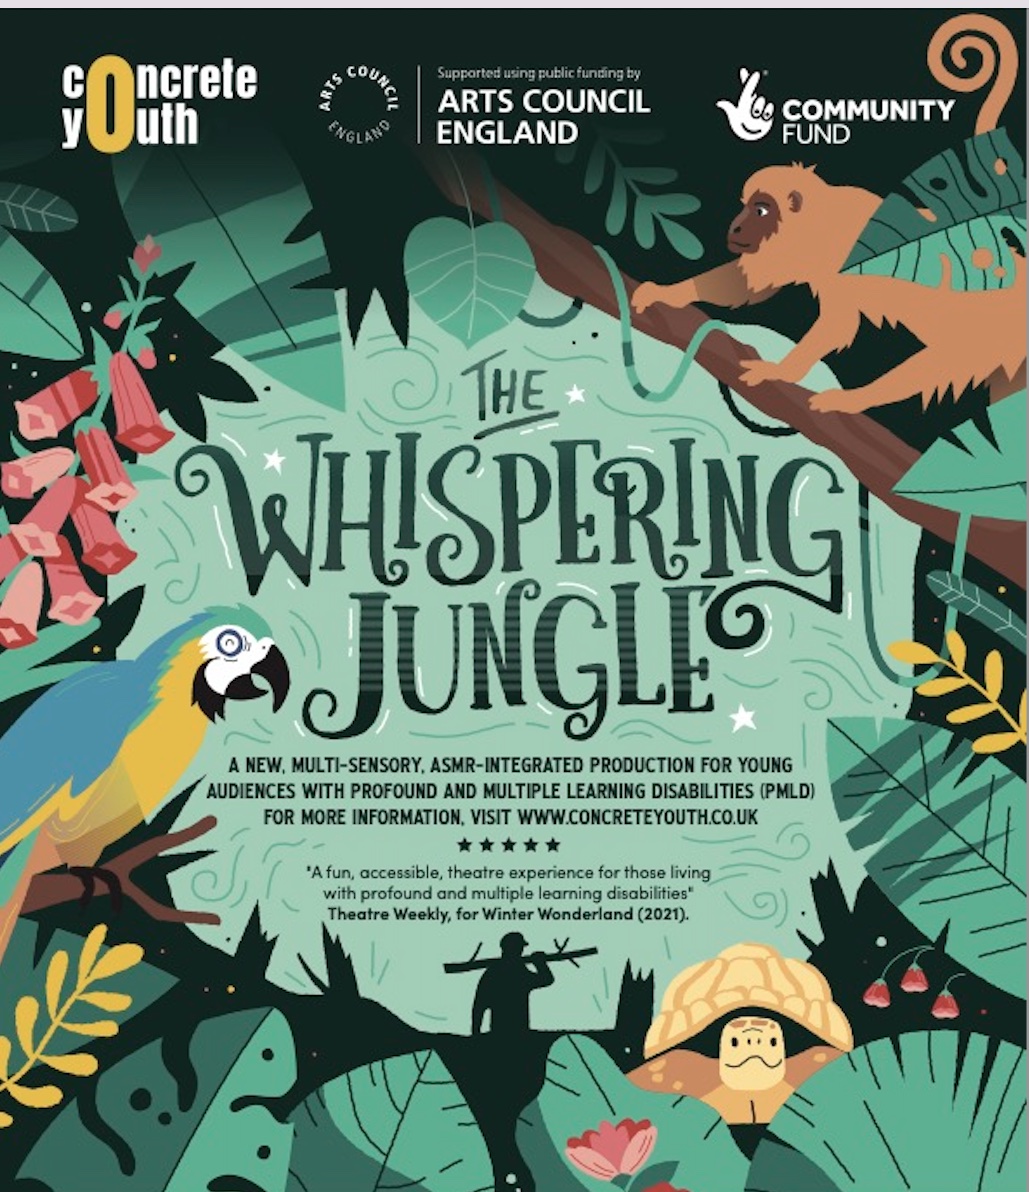 We've  got a few tickets left for The Whispering Jungle on 1&2 August.
A  multi-sensory, asmr-integrated theatre production for audiences with profound and multiple learning disabilities (PMLD). 
ow.ly/c8Yr50JUHau
#colchester #pmld #autism #accesstheatre #accessiblearts